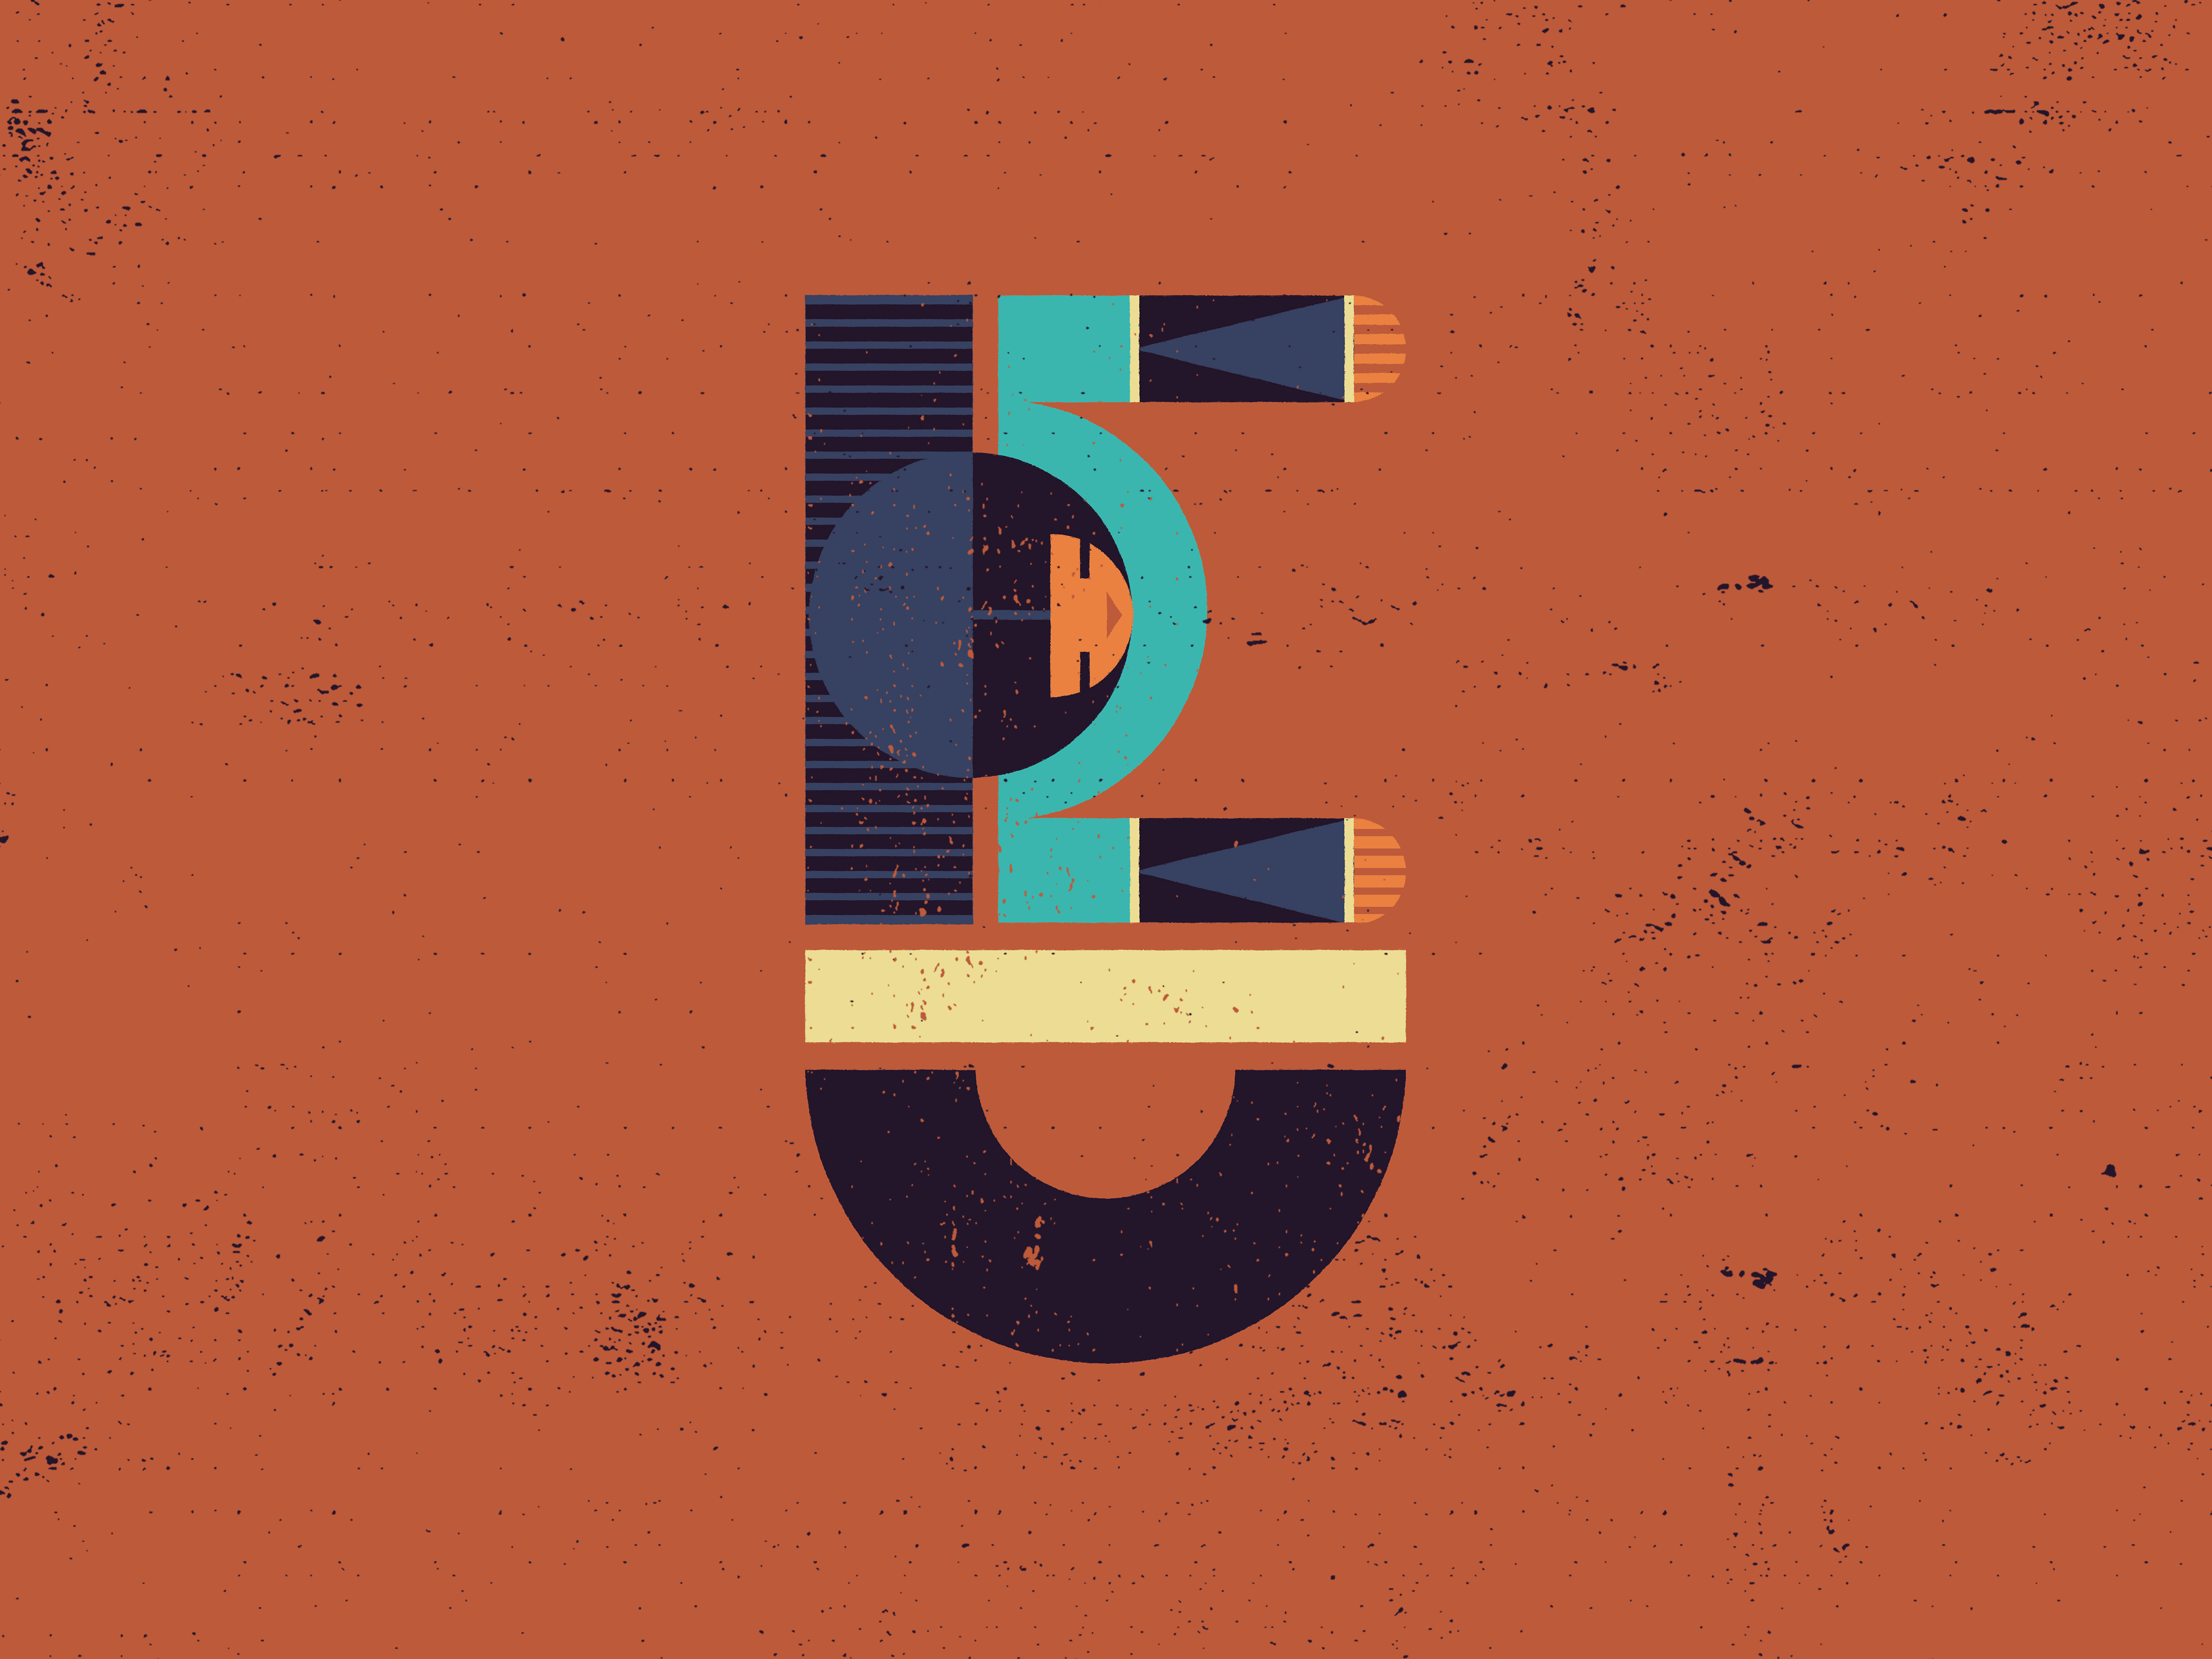 number-5-36-days-of-type-by-sean-m-foster-on-dribbble